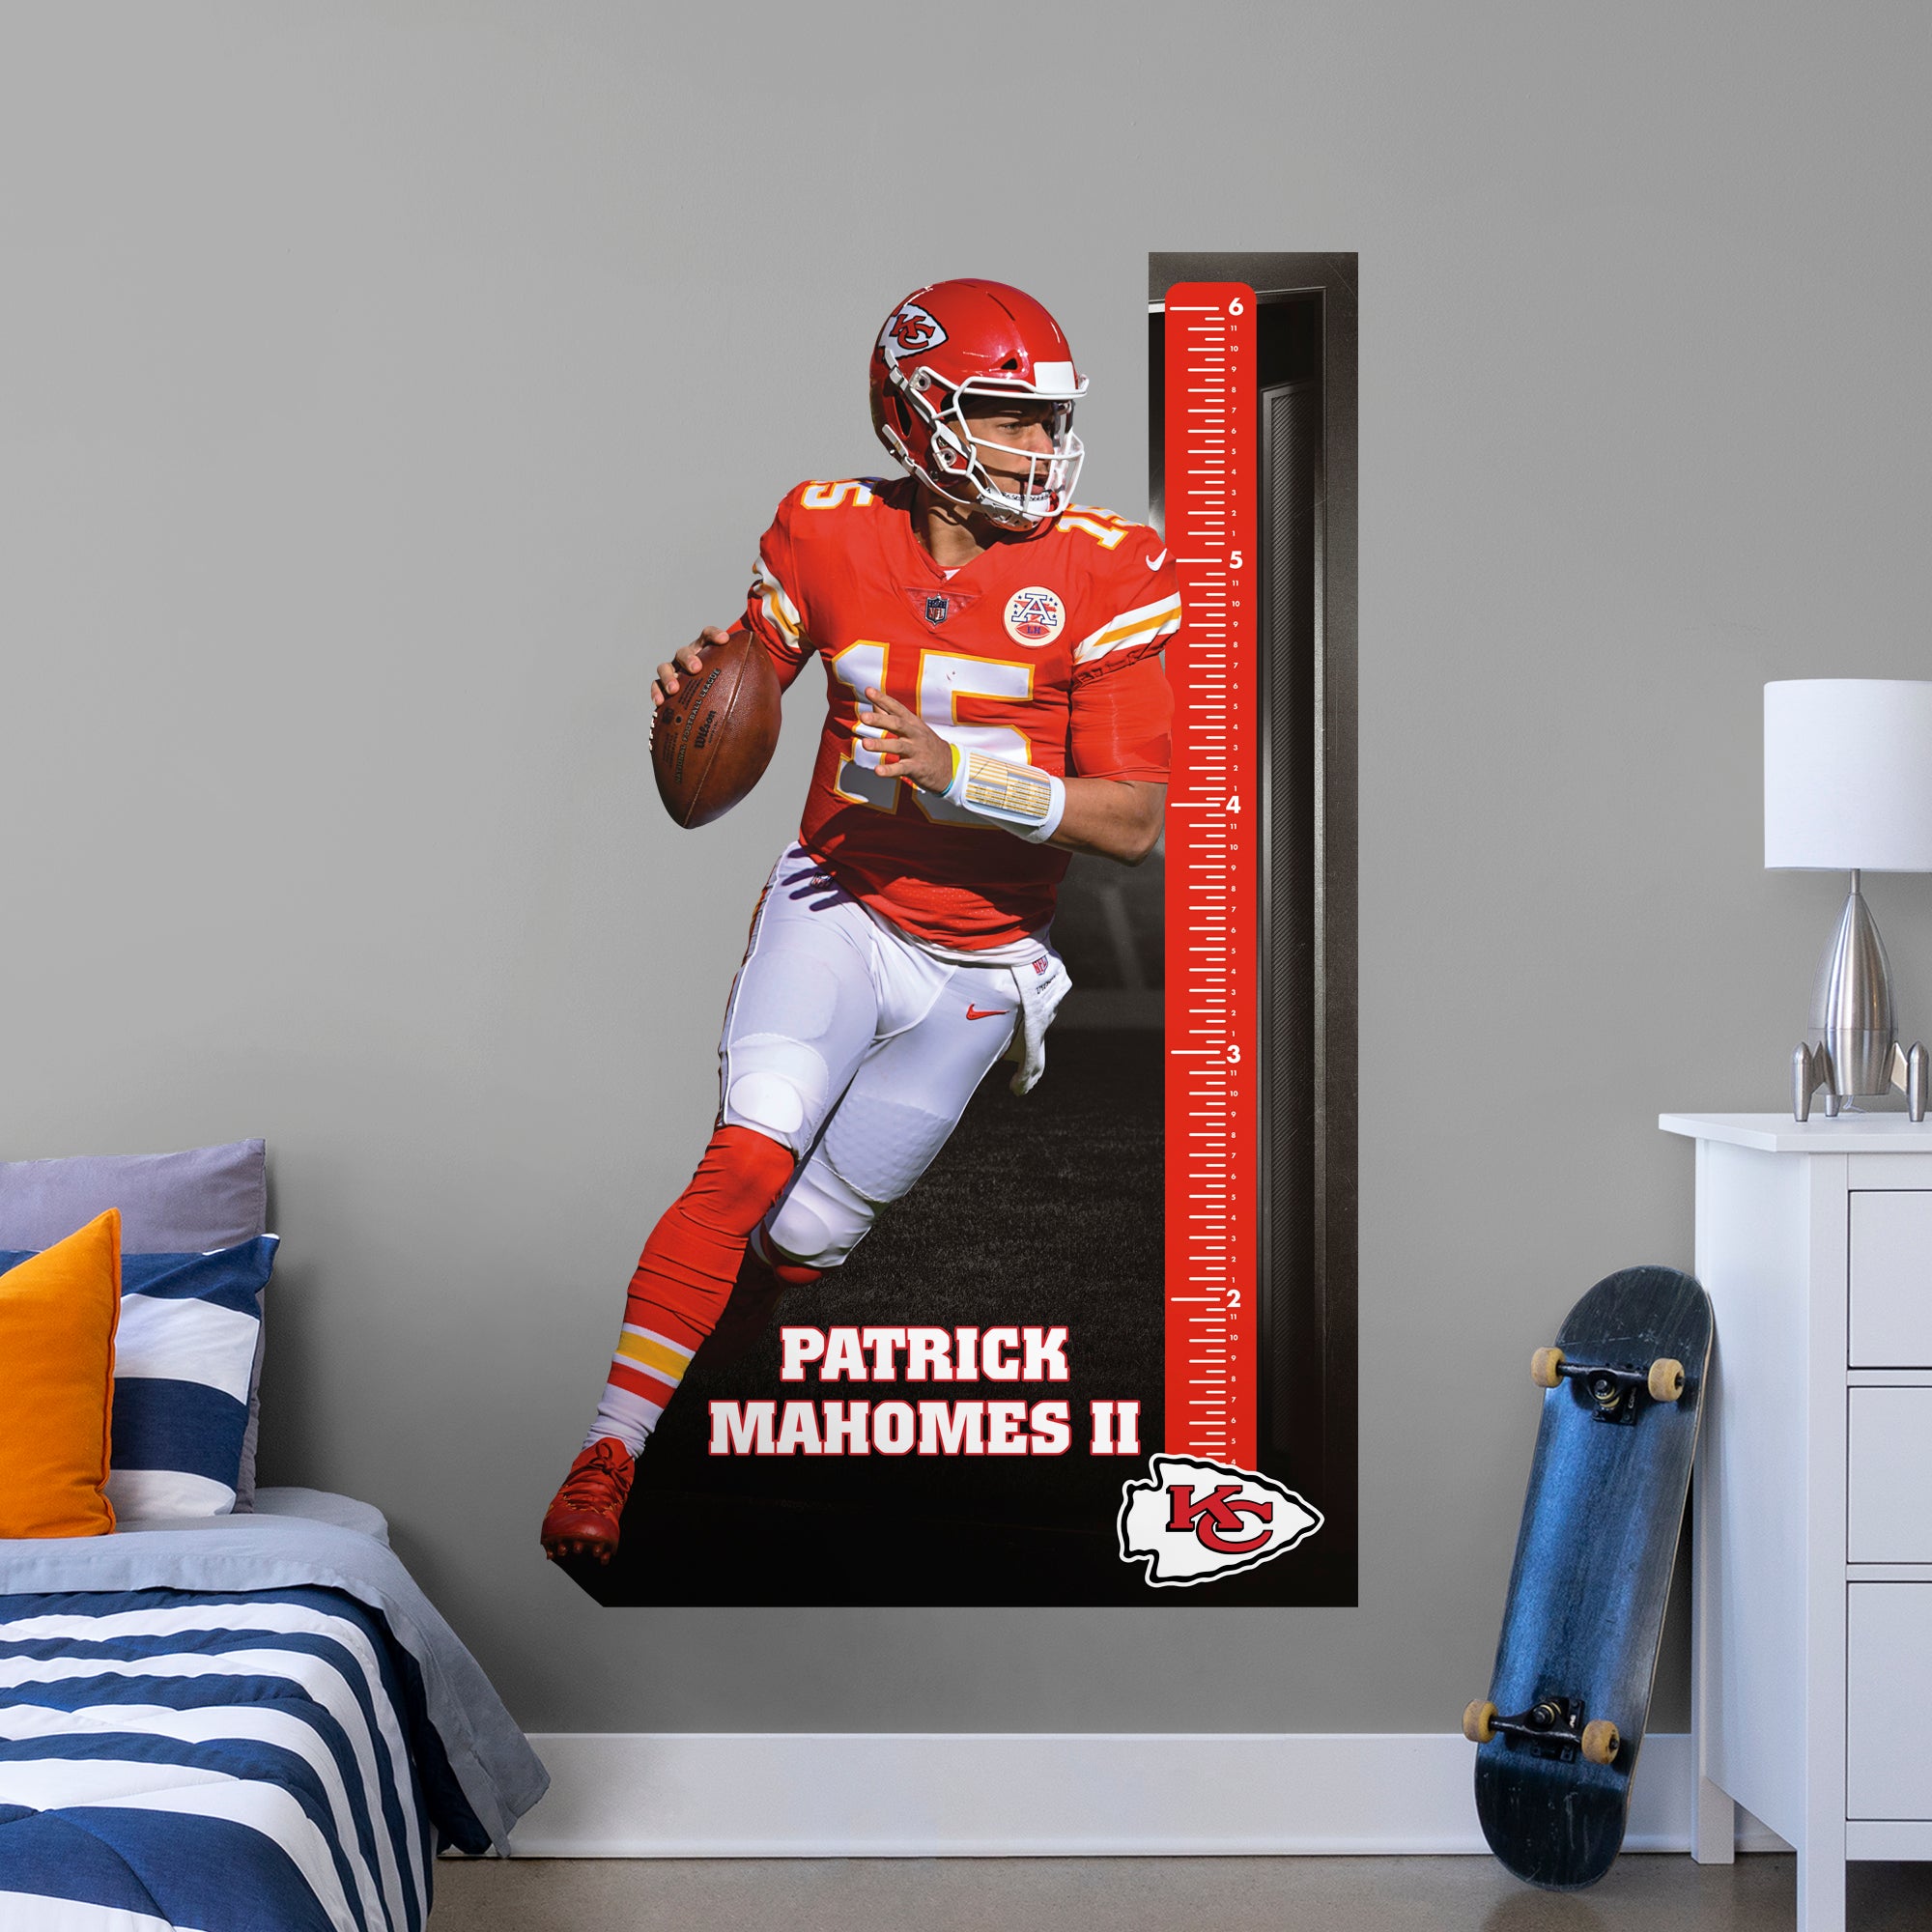 Patrick Mahomes II 2020 Growth Chart - Officially Licensed NFL Removable Wall Decal Growth Chart (40"W x 67"H) by Fathead | Viny